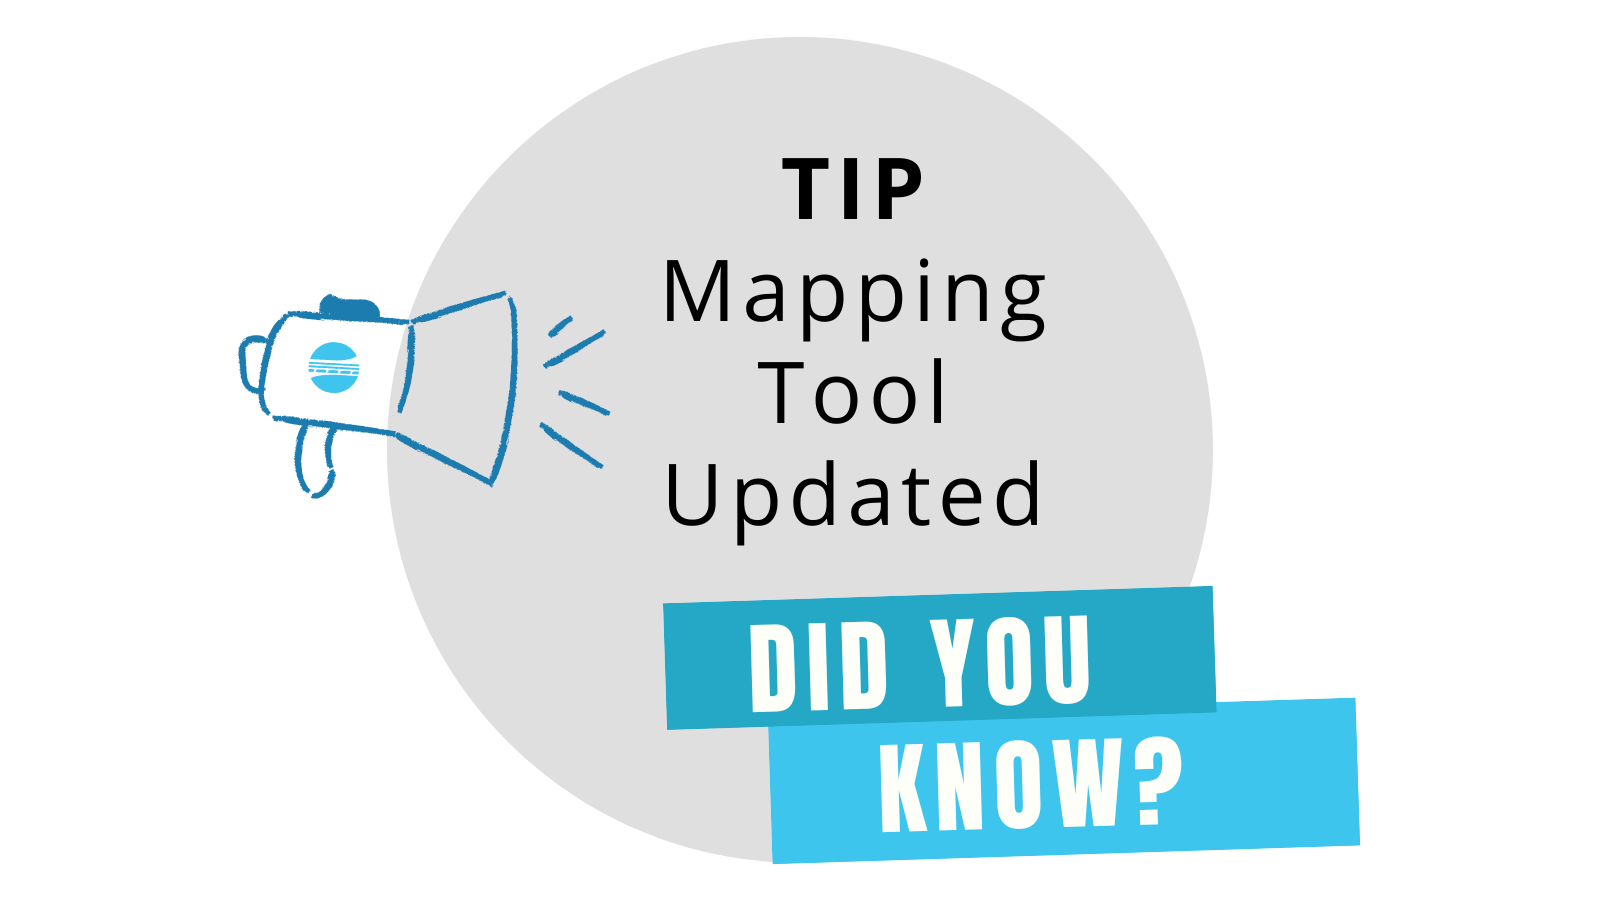 TIP mapping tool updated